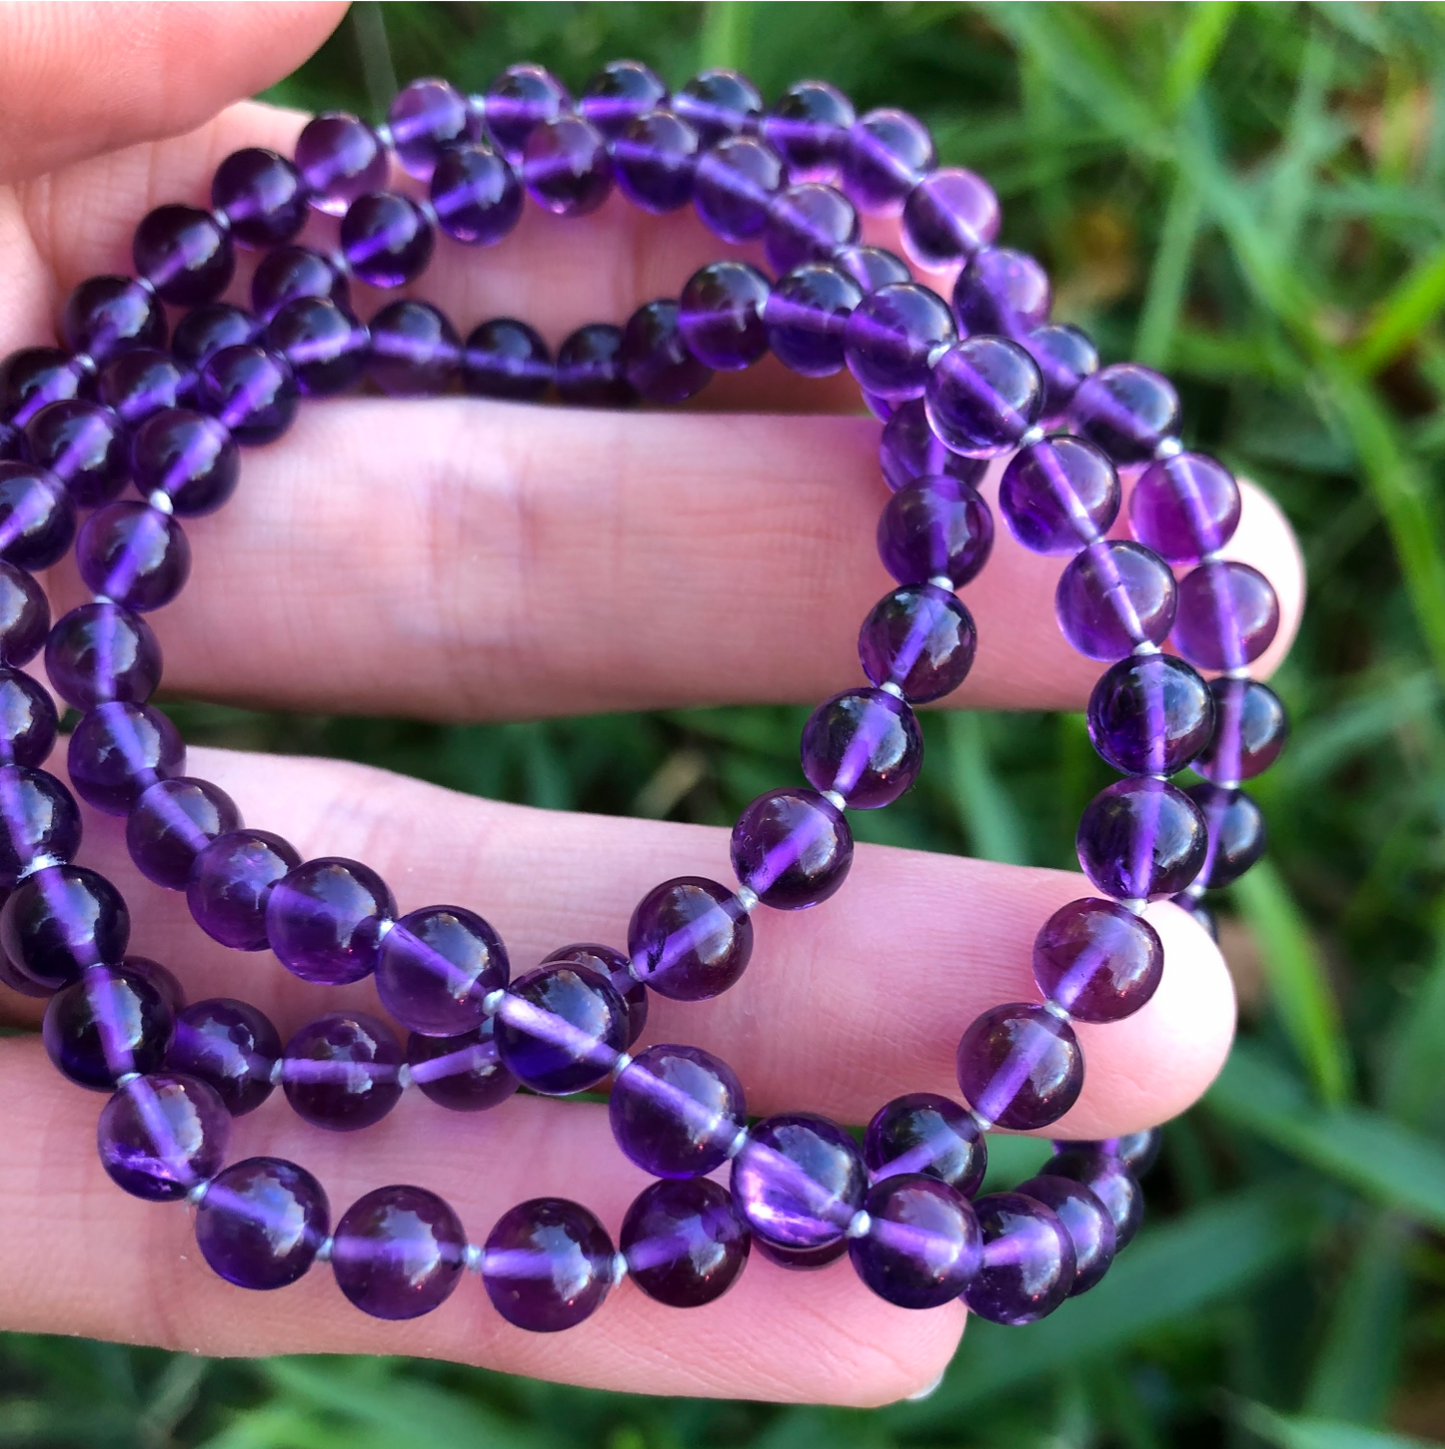 A hand holding a crystal healing Amethyst necklace known for attaining wisdom